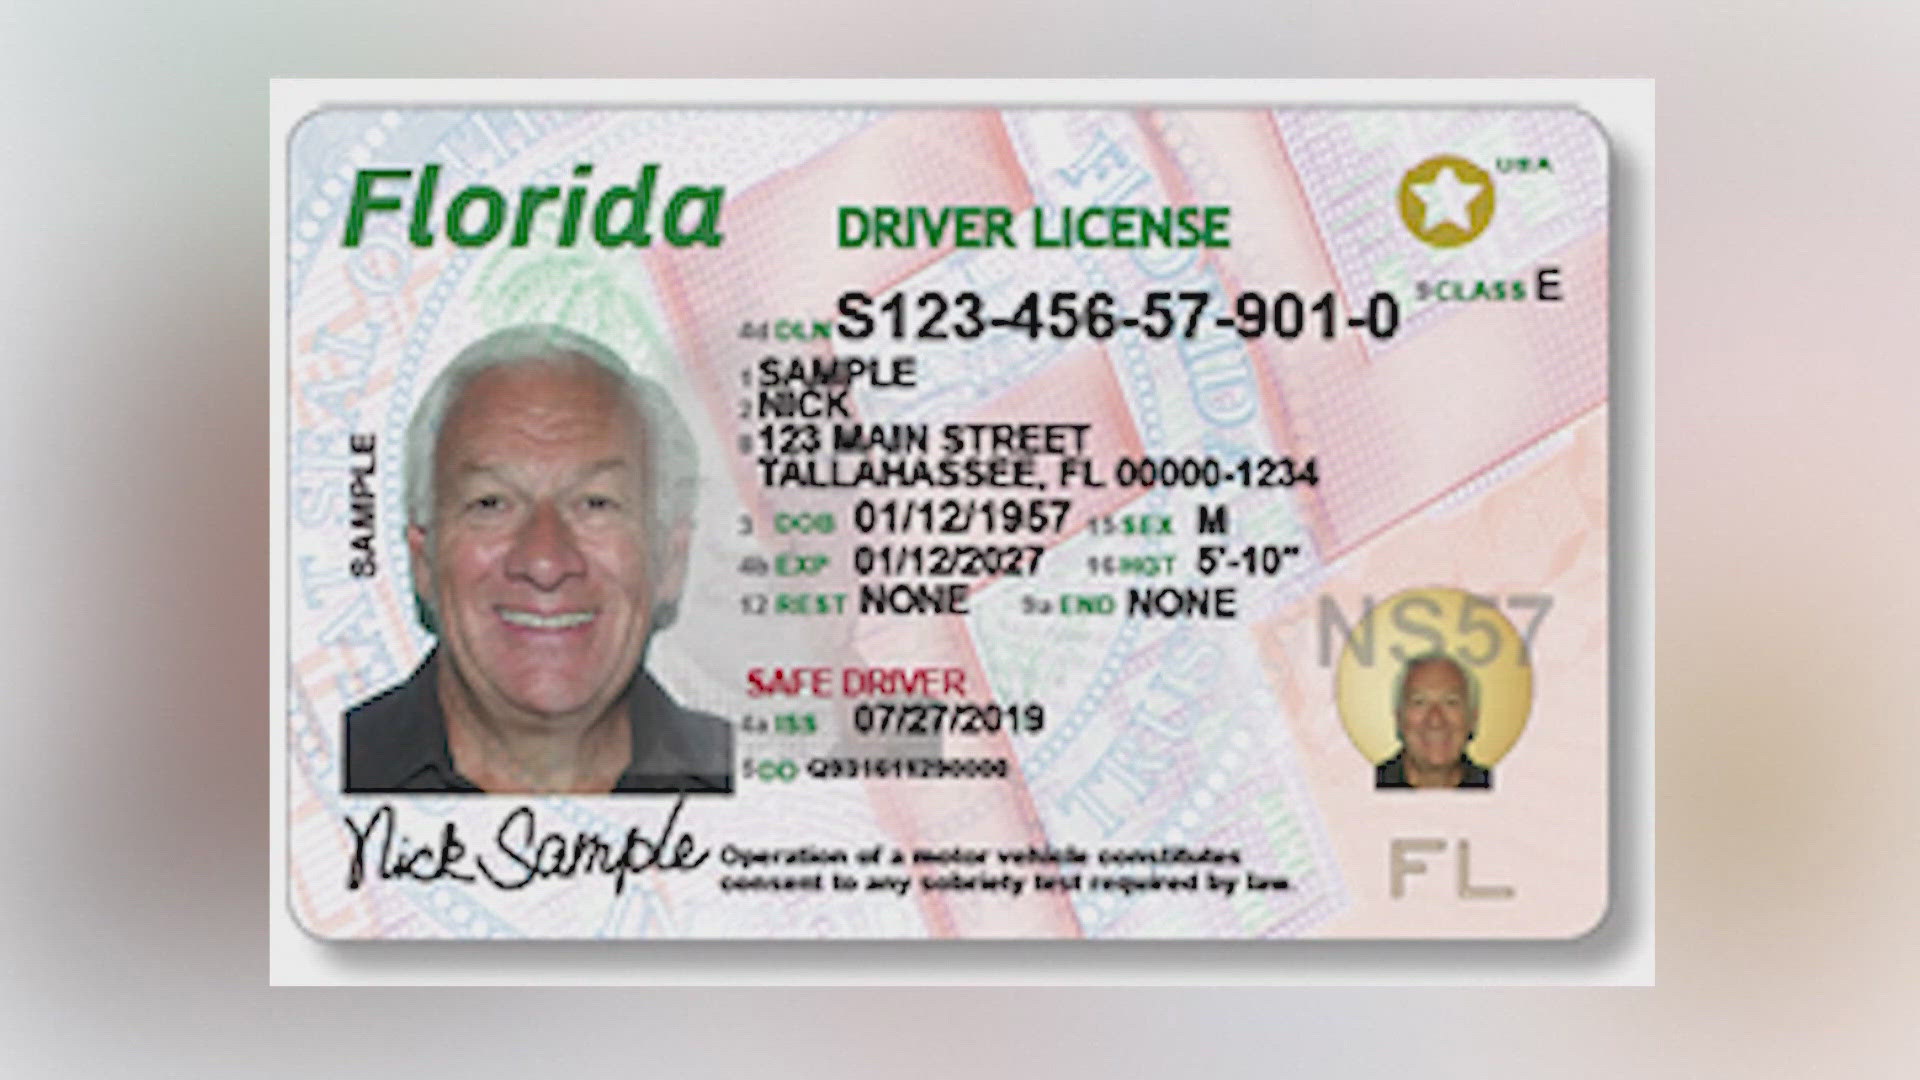 Florida officials say the driver's license number format will remain the same, but will require four of the numbers to be randomized.